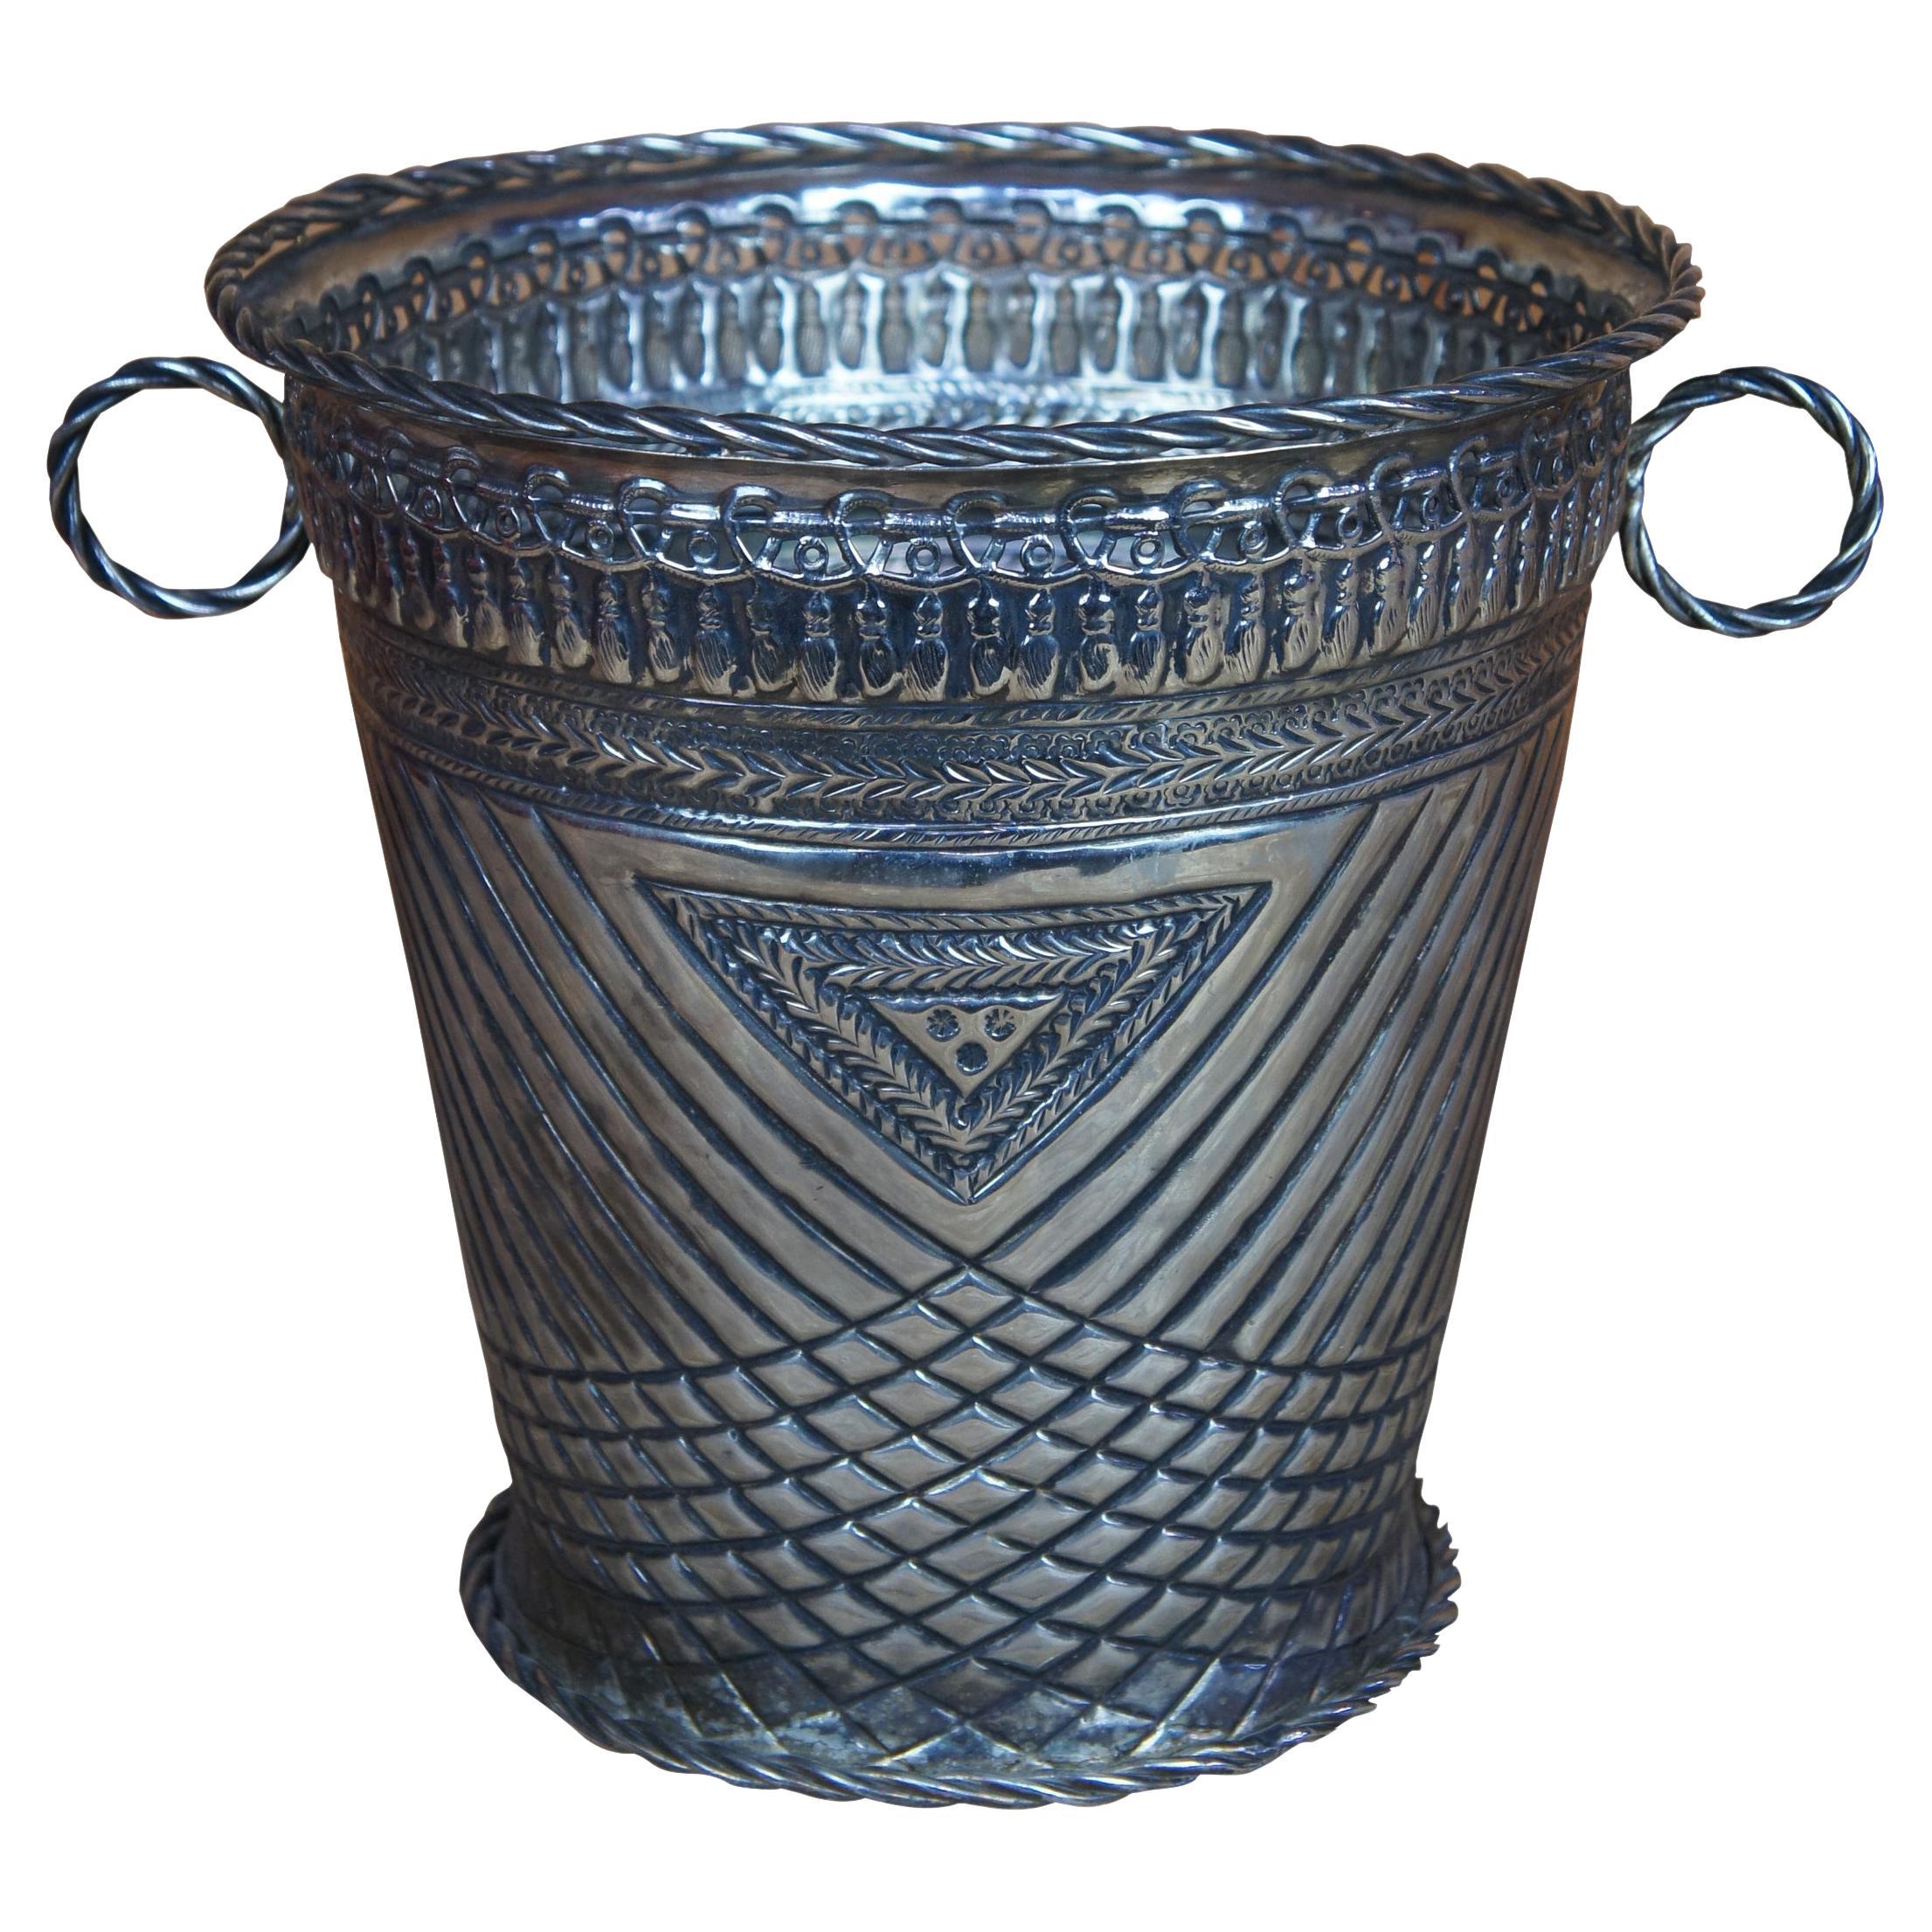 Antique Moroccan Silver Hammam Hammered Reticulated Bucket Ice Wine Trash Can